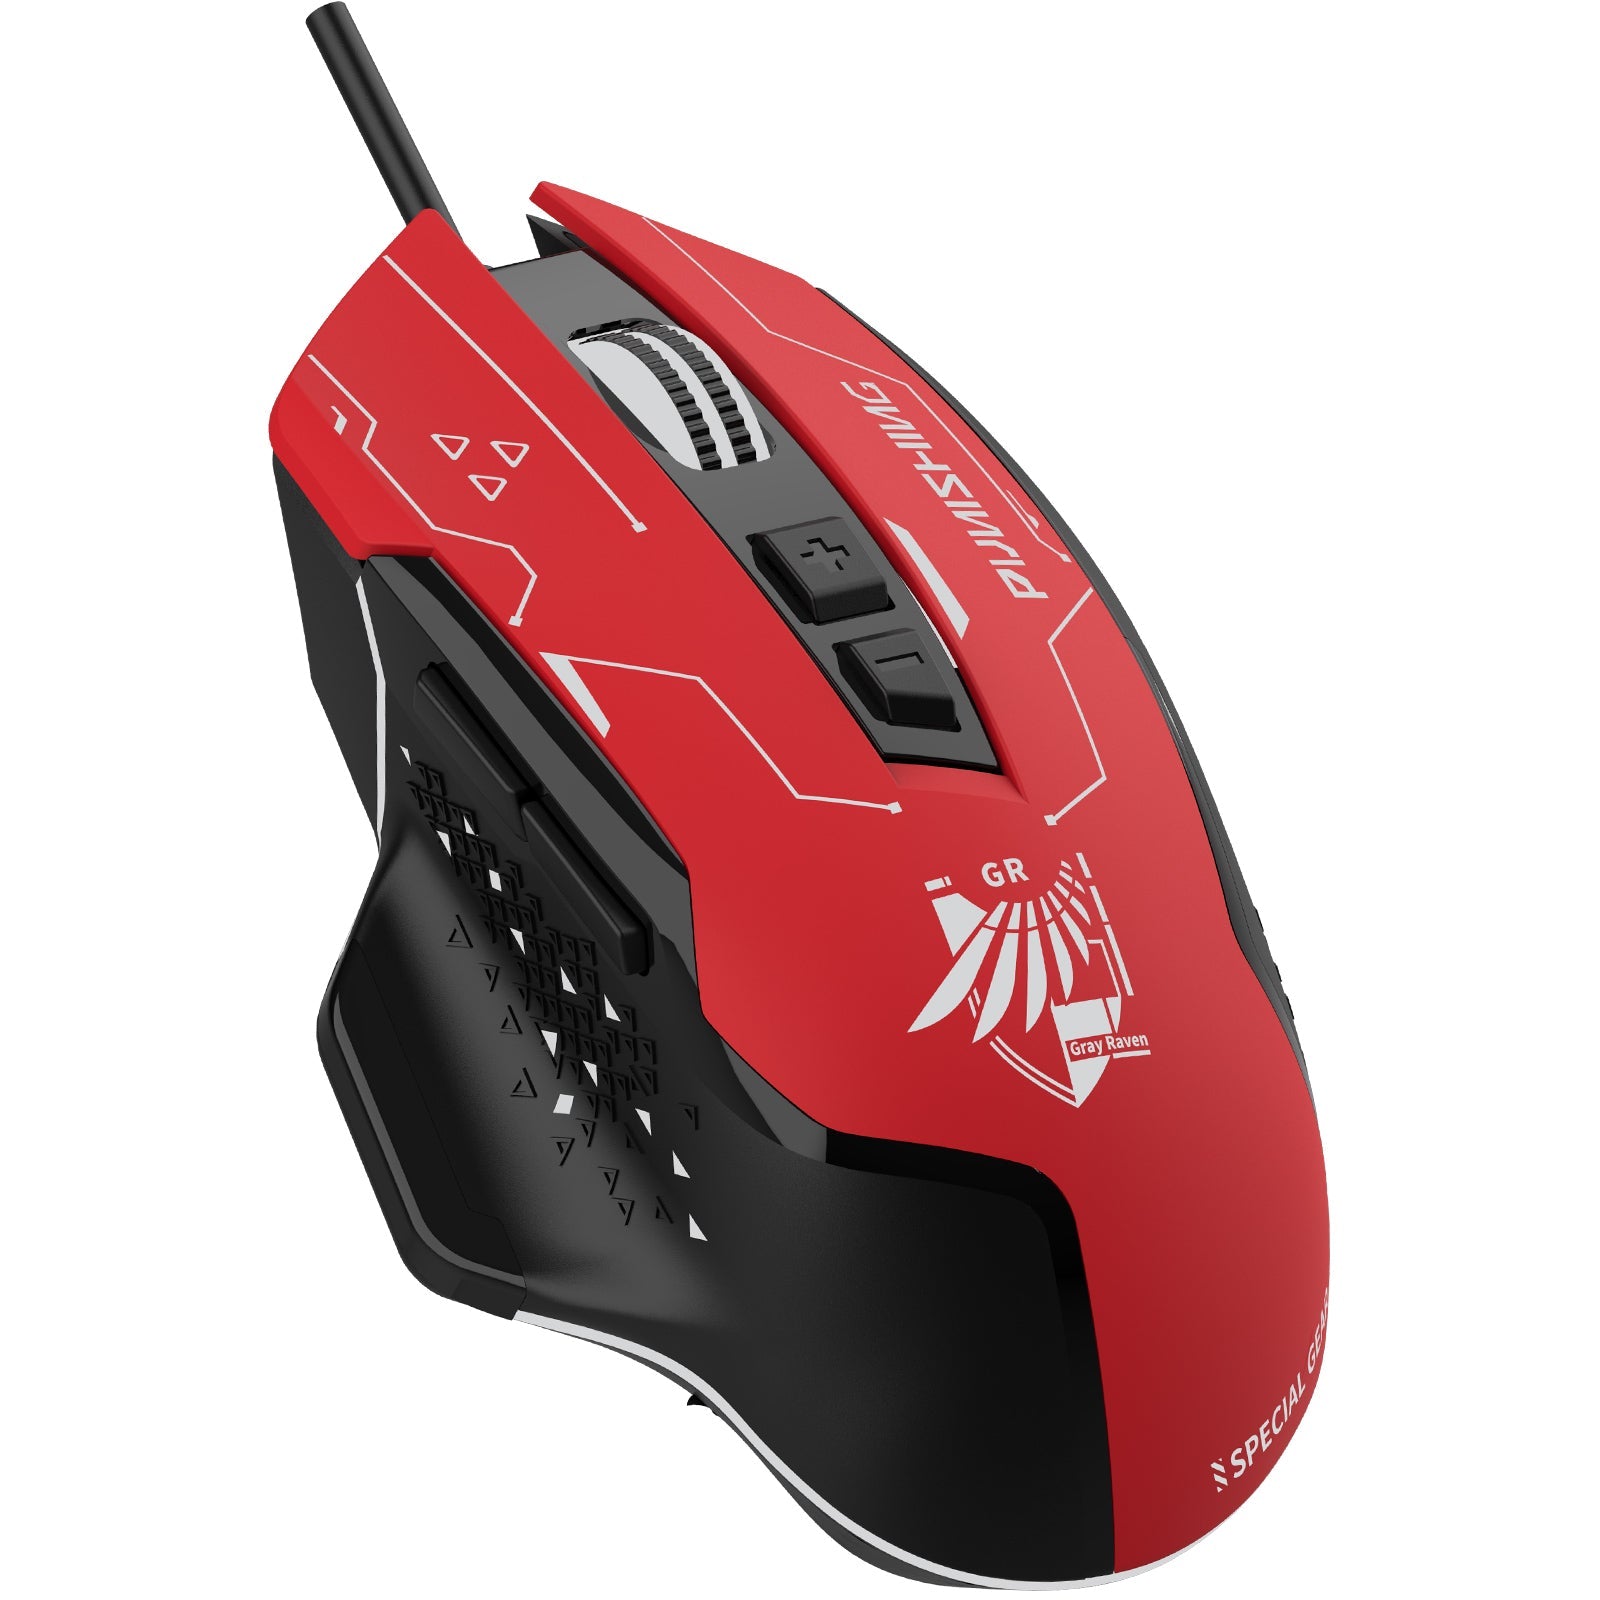 GTPLAYER X PUNISHING: GRAY RAVEN SERIES SPECIAL GAMING MOUSE